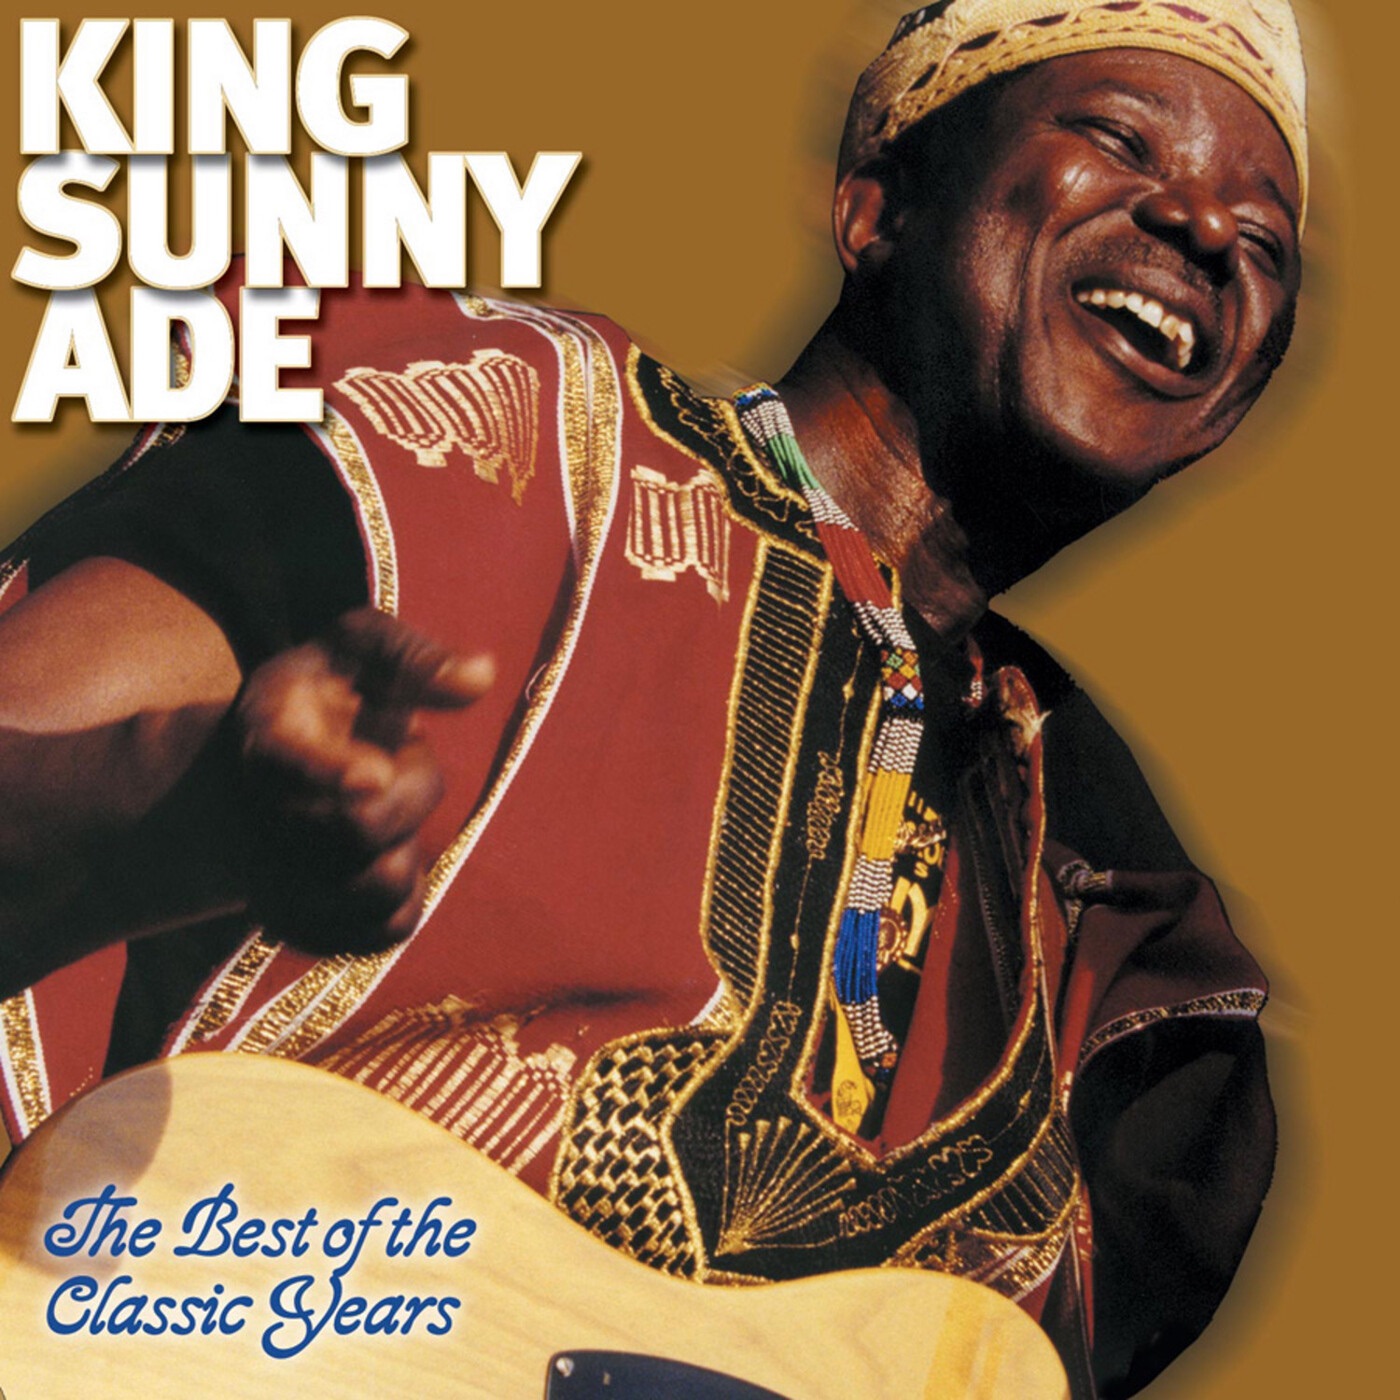 The Best of the Classic Years by King Sunny Ade